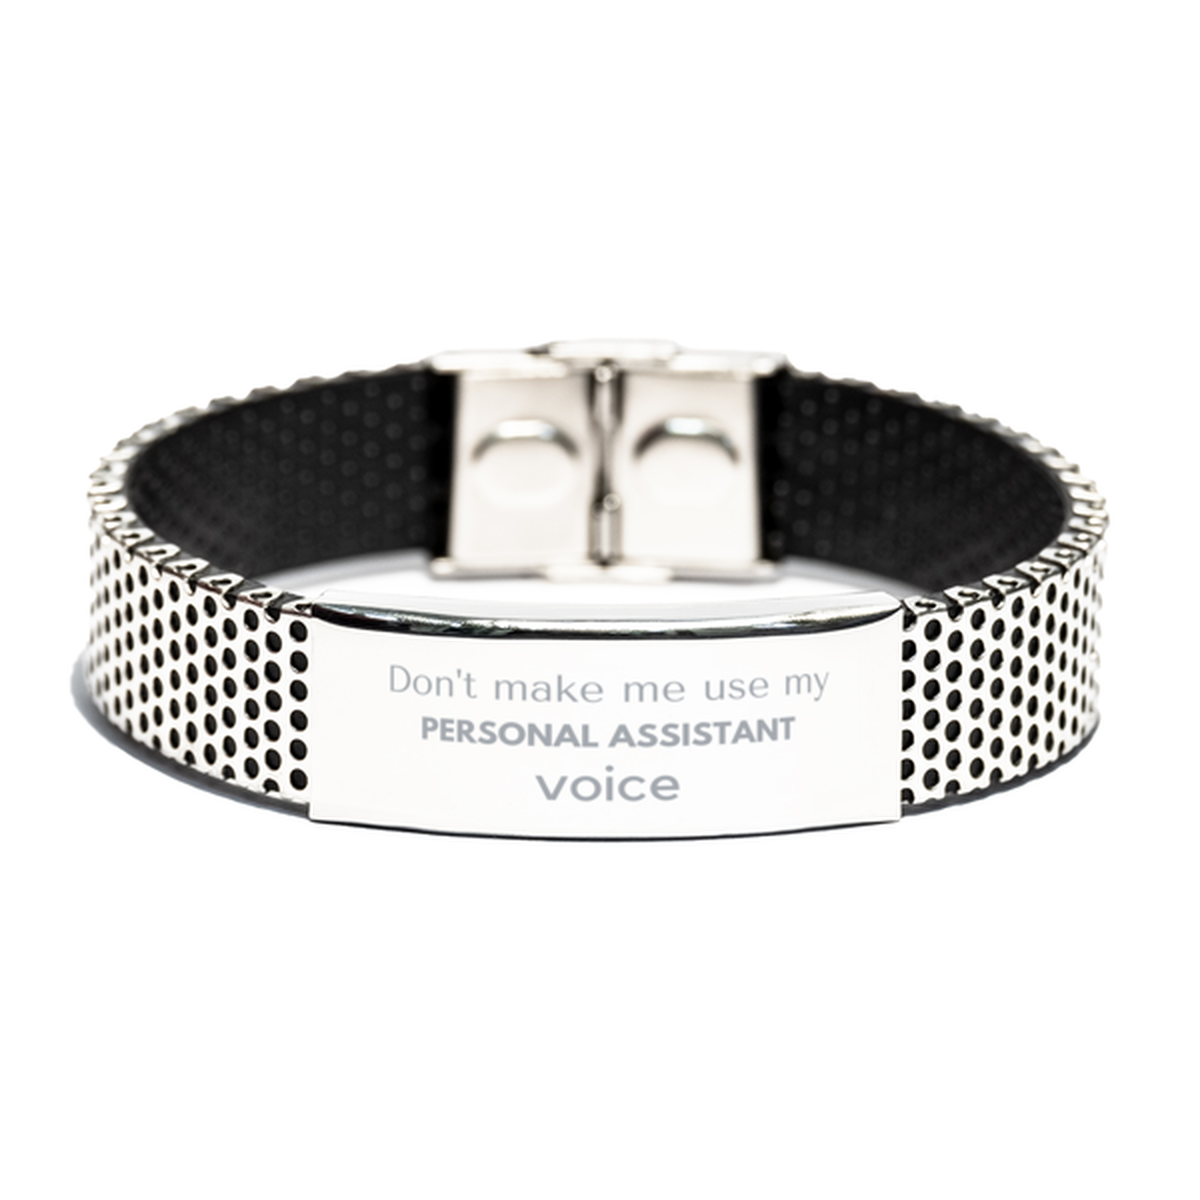 Don't make me use my Personal Assistant voice, Sarcasm Personal Assistant Gifts, Christmas Personal Assistant Stainless Steel Bracelet Birthday Unique Gifts For Personal Assistant Coworkers, Men, Women, Colleague, Friends